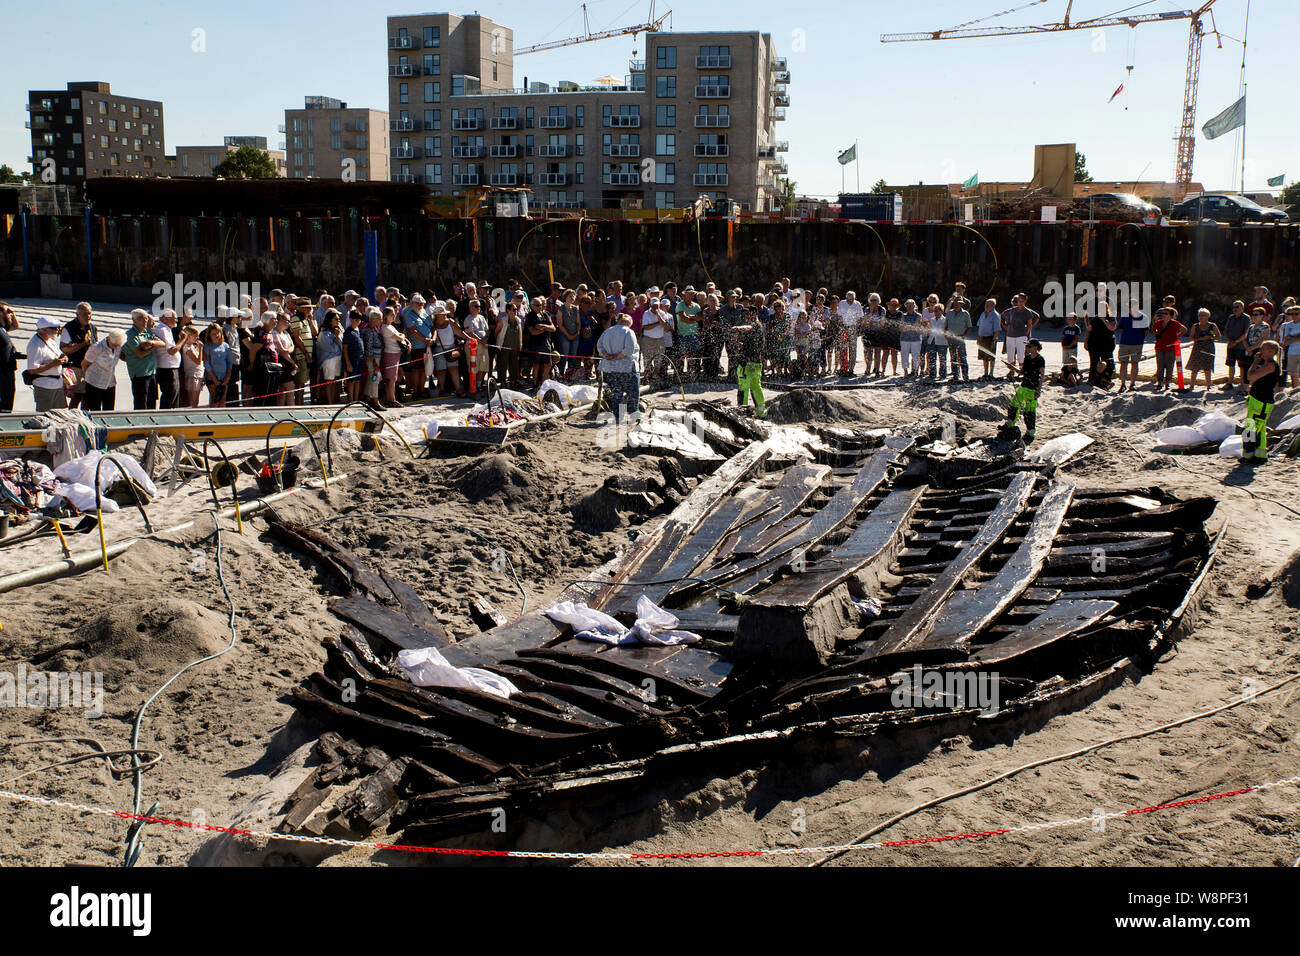 A  500 years old ship wreck found which is excavated at a building site is presented to the public near Koege, Denmark. For further information, se additional information. (Photo by Ole Jensen/Alamy) Stock Photo